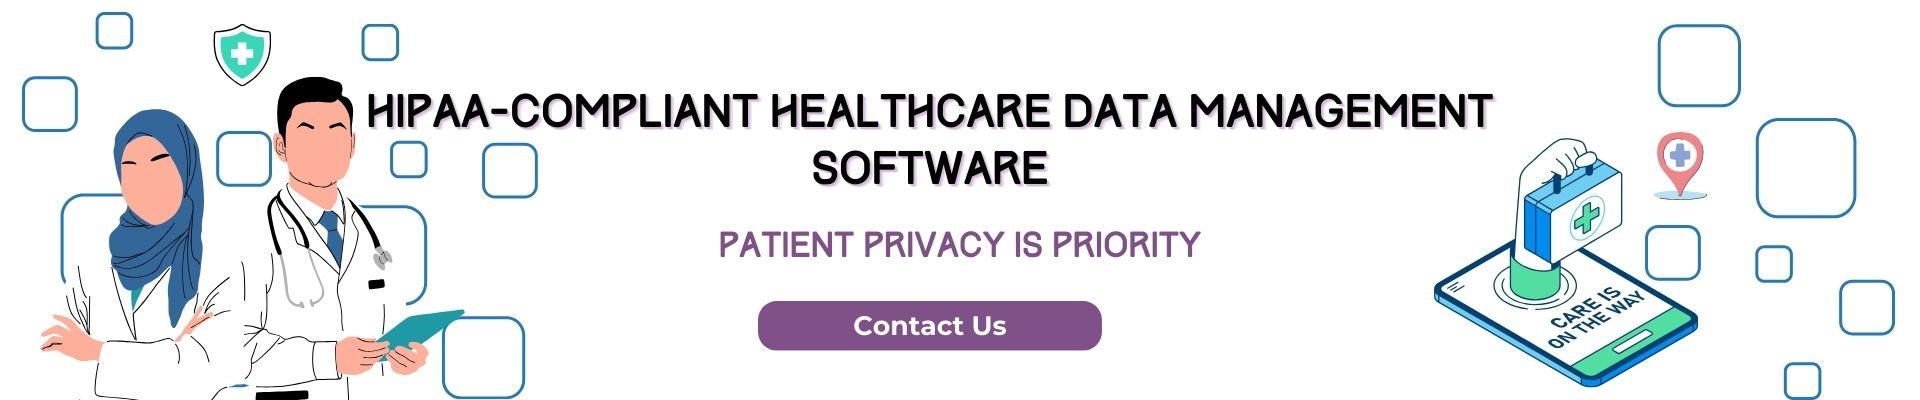 HIPAA-compliant healthcare data management software ad template